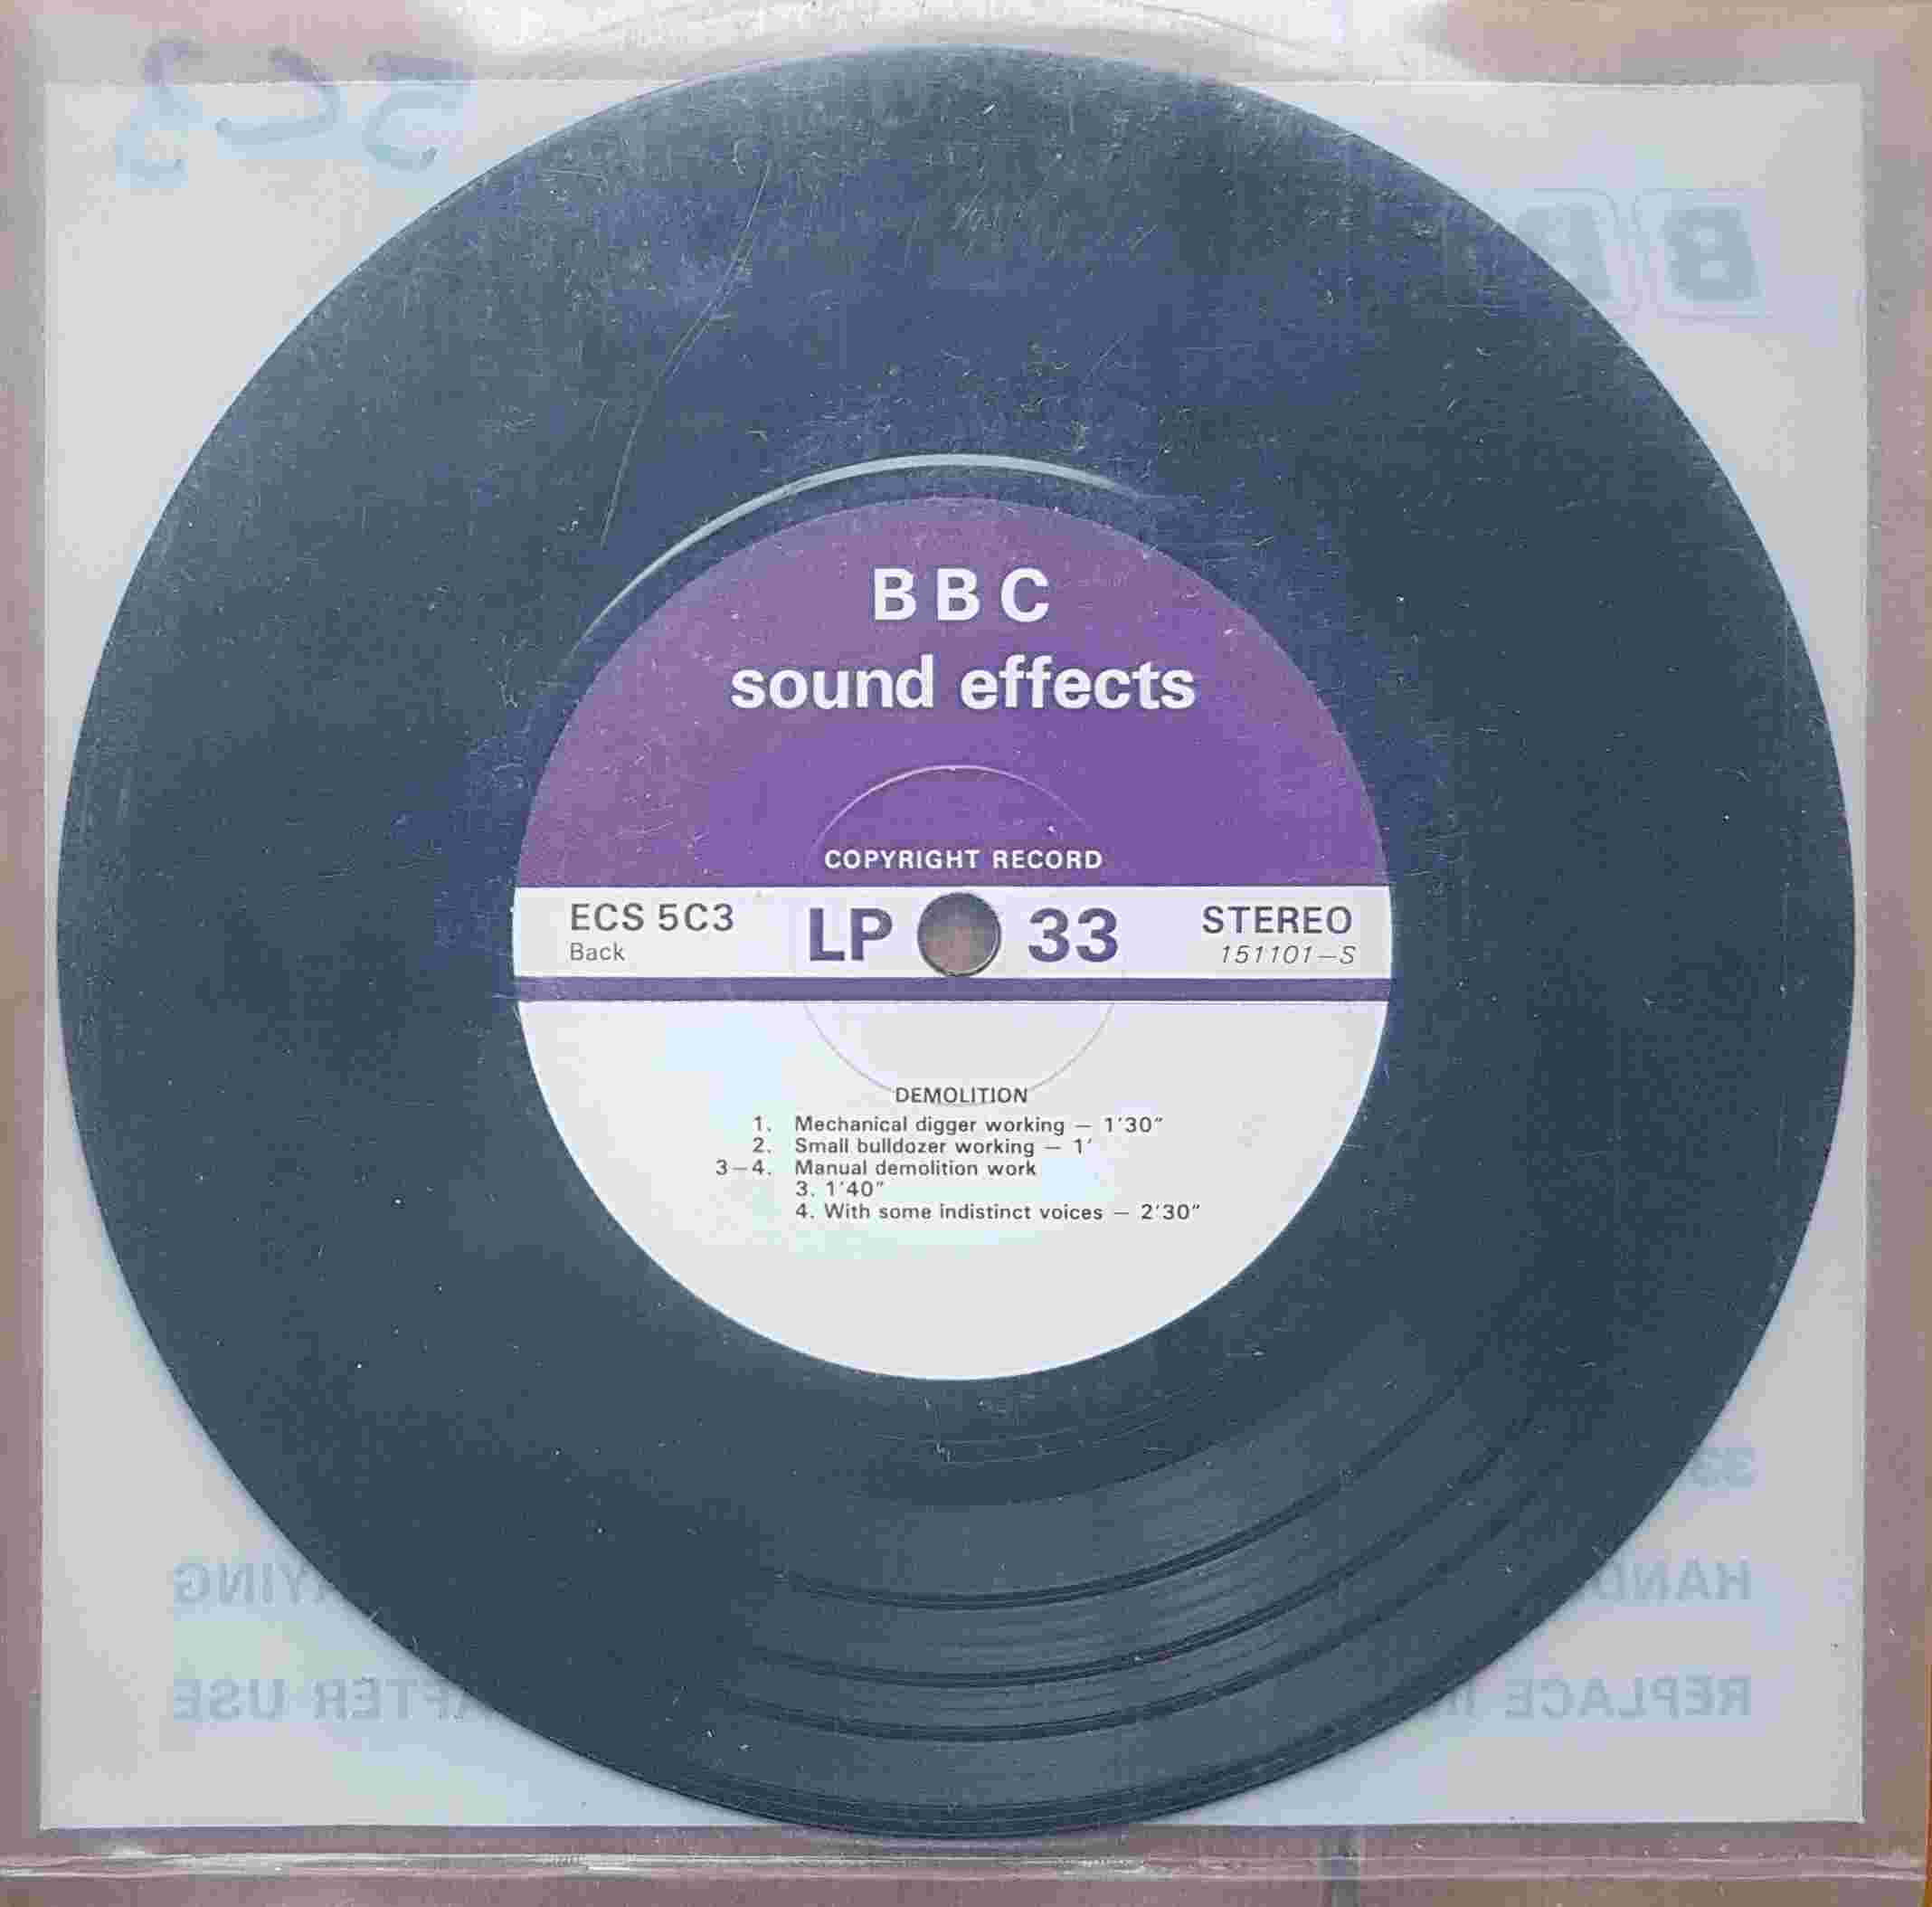 Picture of ECS 5C3 Demolition by artist Not registered from the BBC records and Tapes library